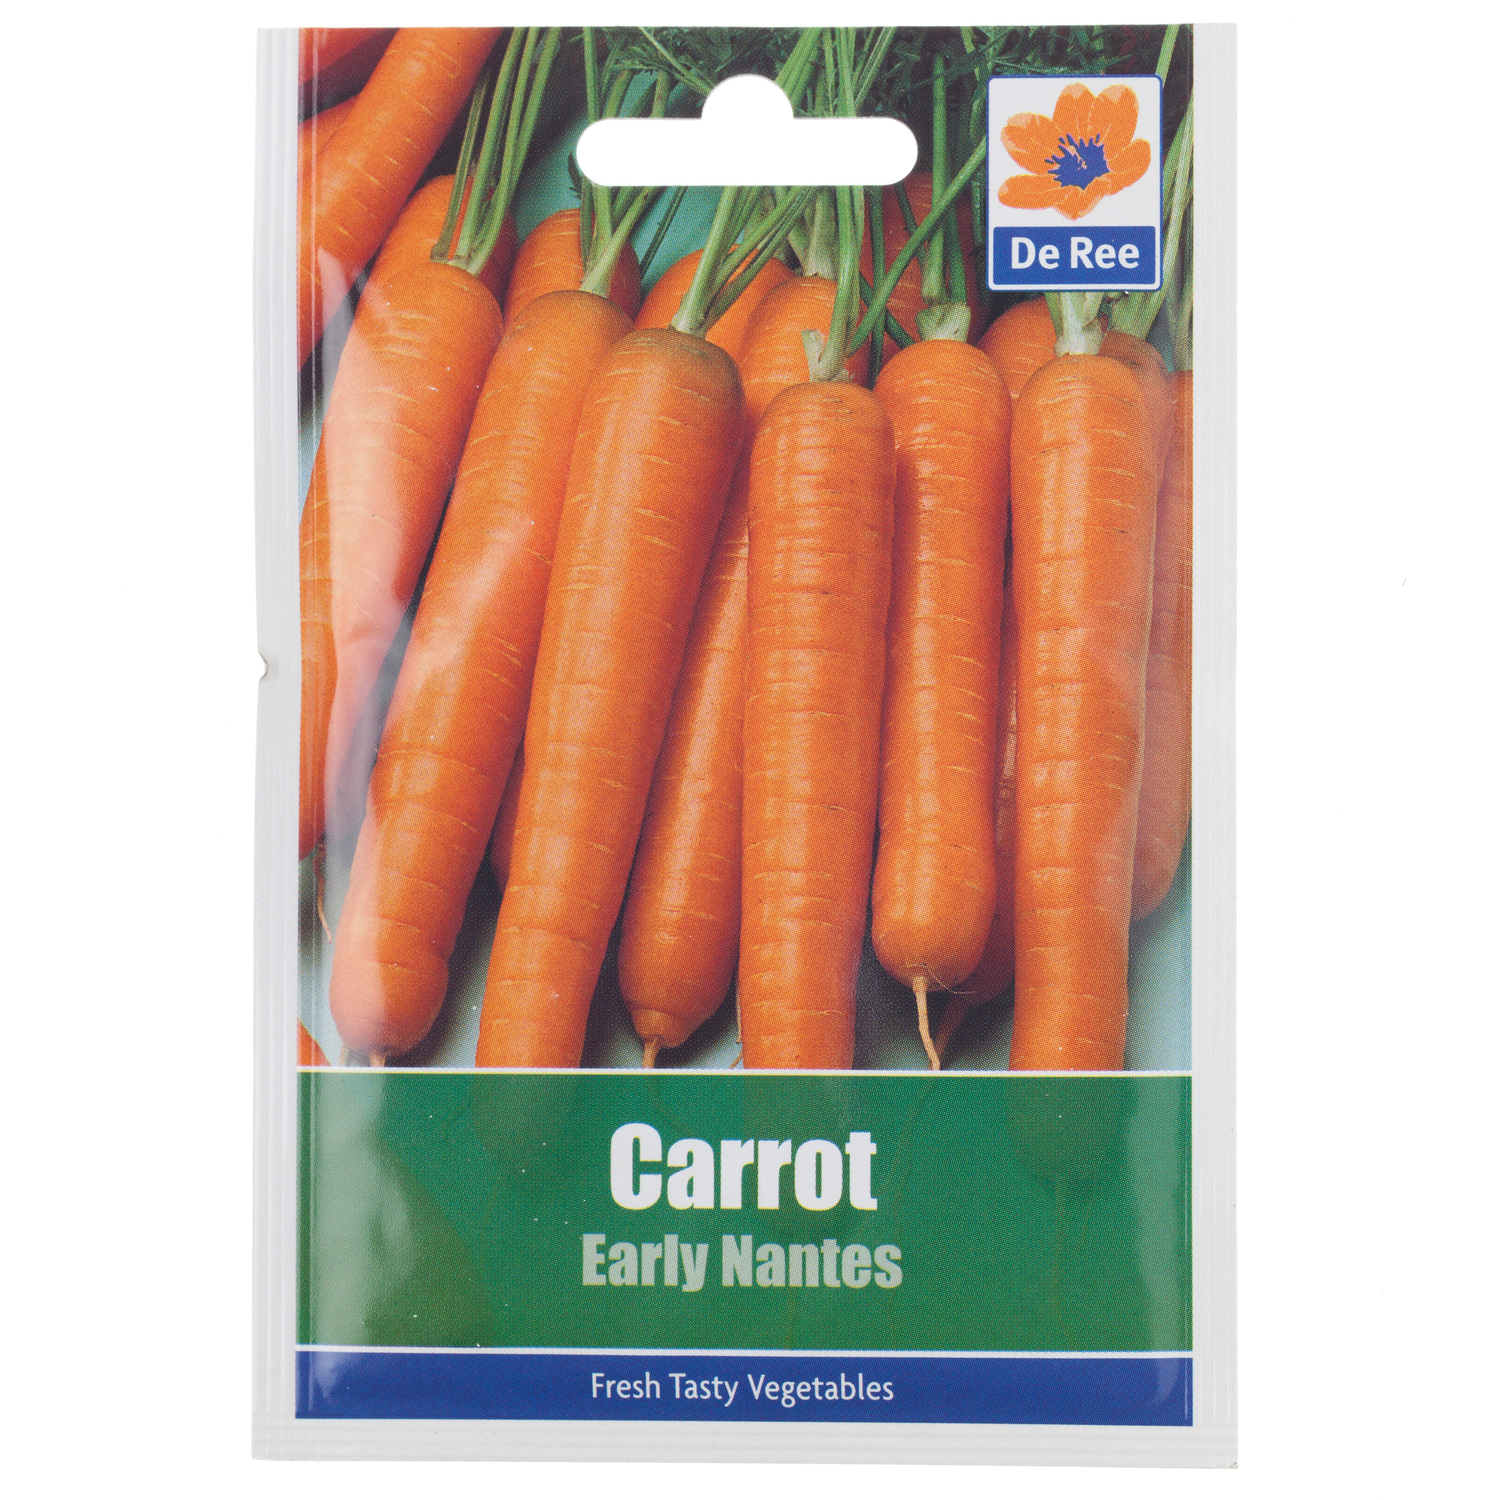 Early Nantes 2 Carrot Seed Packet Image